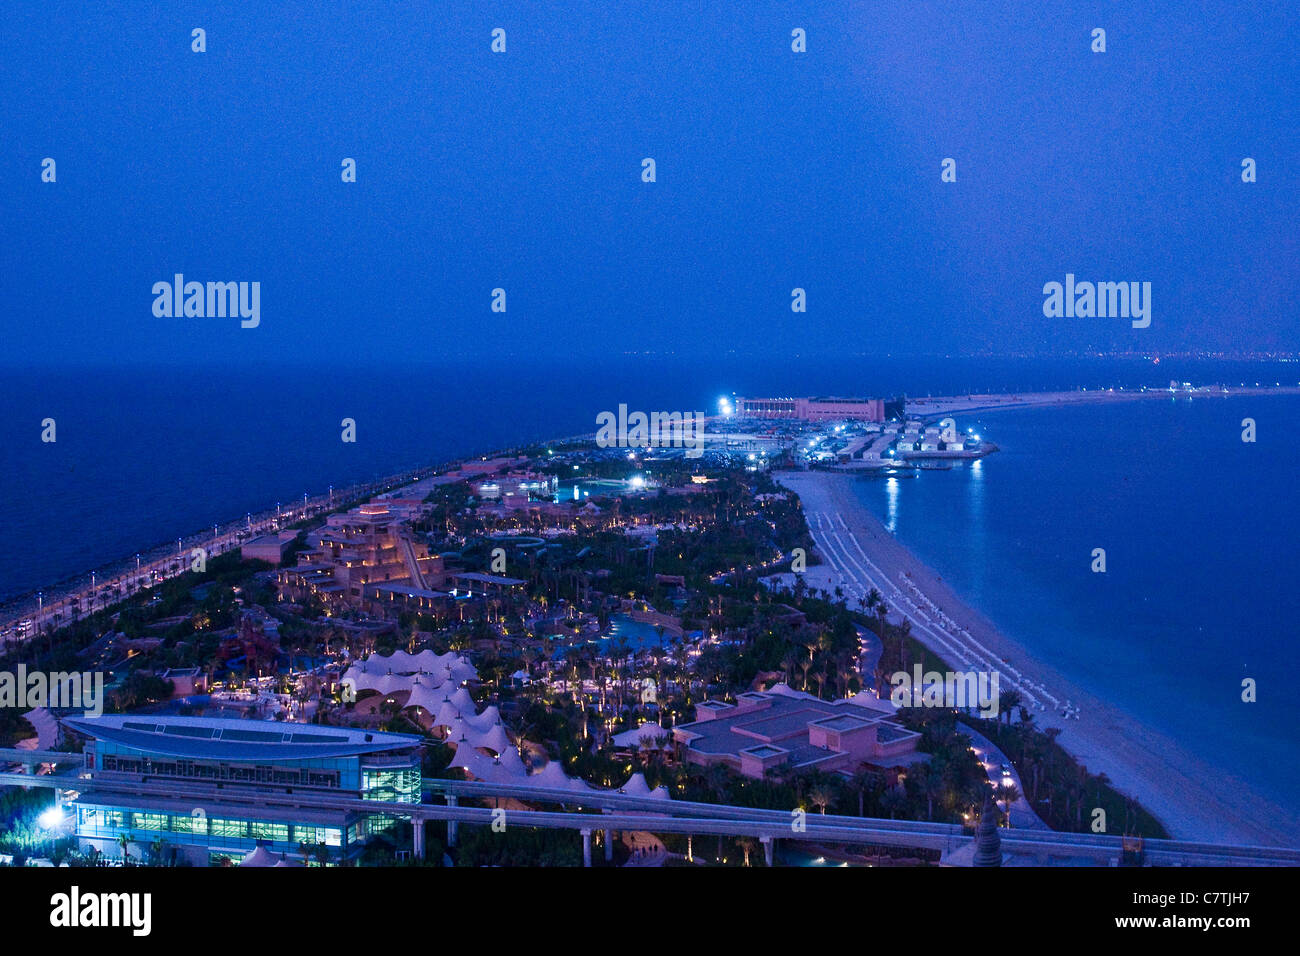 UAE, Dubay, view of the artificial island at night Stock Photo